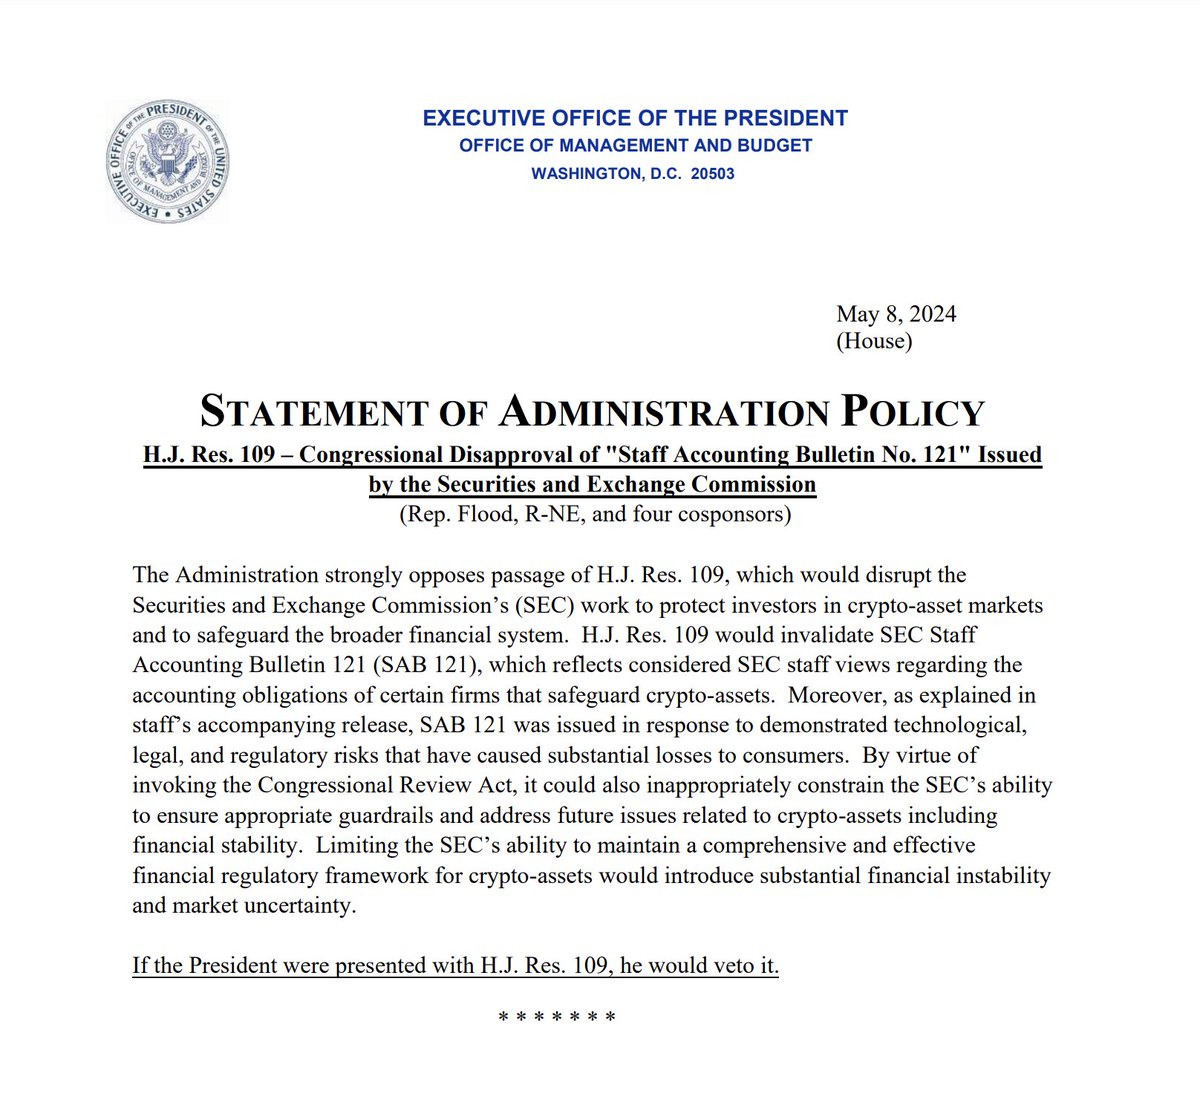 Discouraged that President Biden issued a Statement of Administration Policy saying he would veto H.J. Res 109, the Joint Resolution to nullify the SEC's Staff Accounting Bulletin (SAB) 121. SAB 121 effectively prohibits trusted custodians from being able to manage digital…